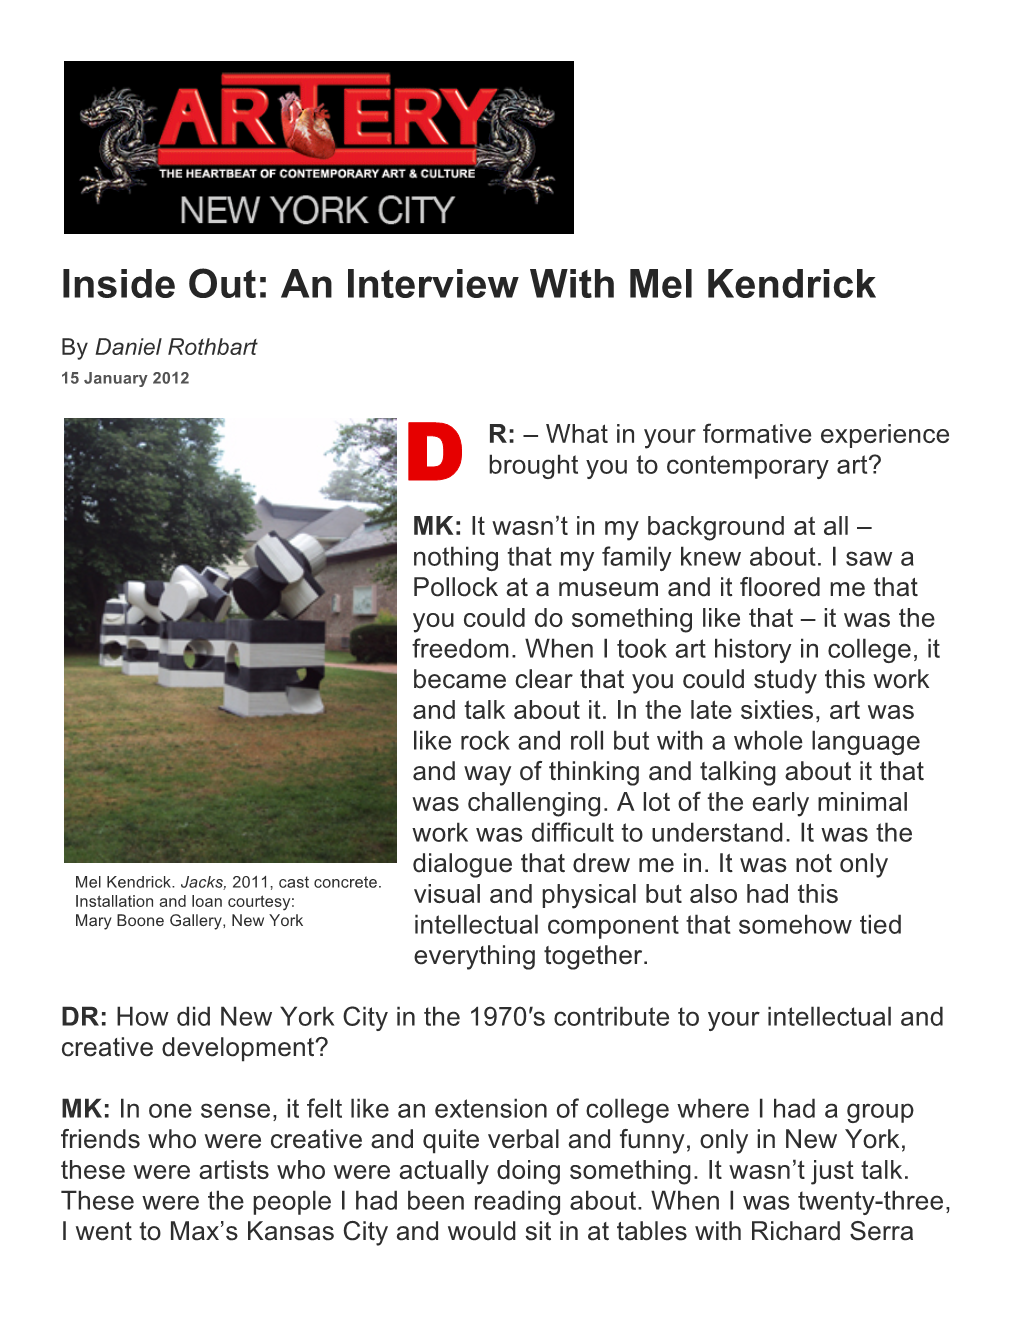 Inside Out: an Interview with Mel Kendrick